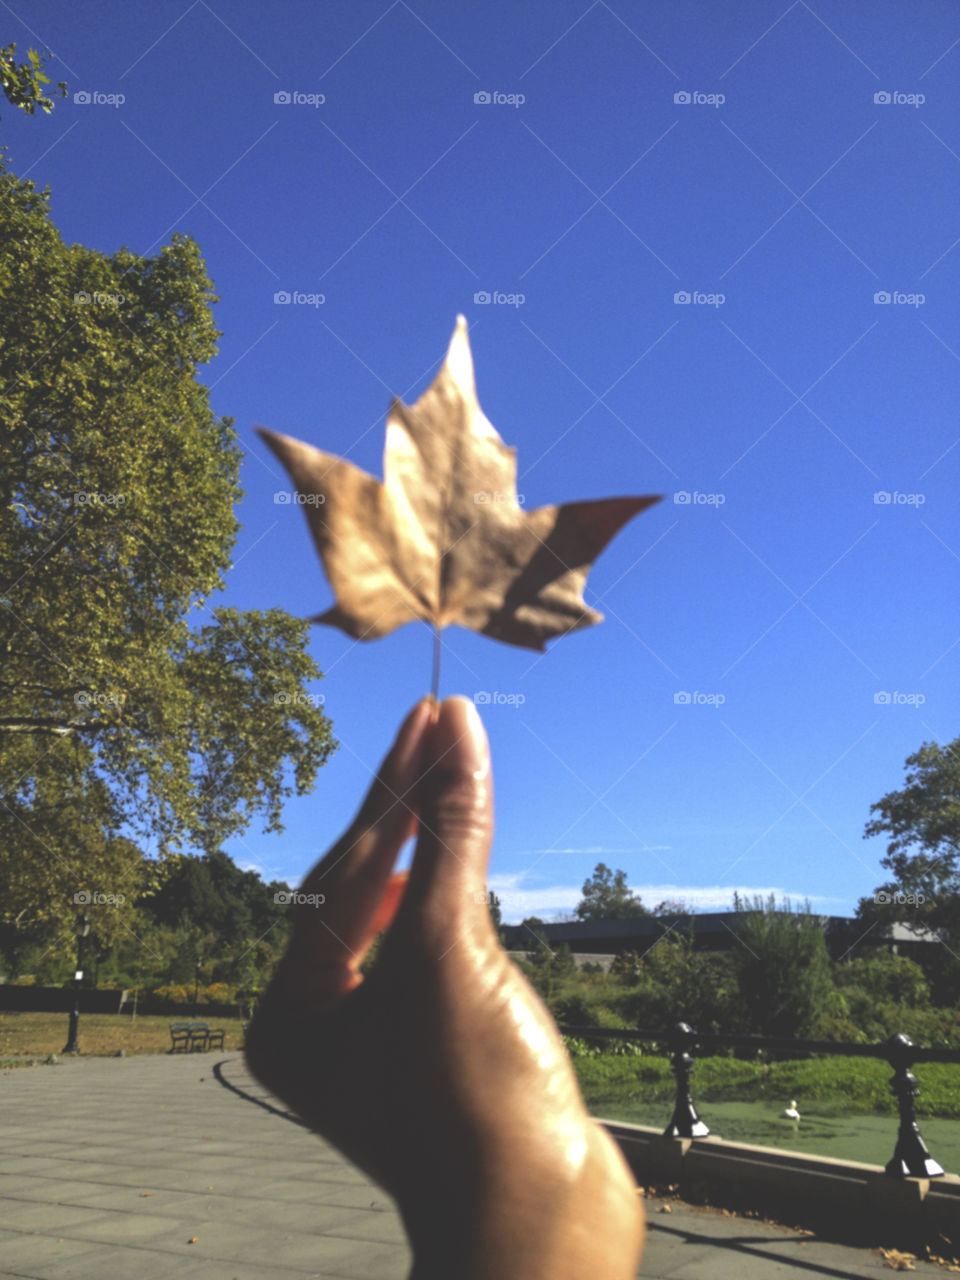 Hand holding a fallen leaf against a blue sky.